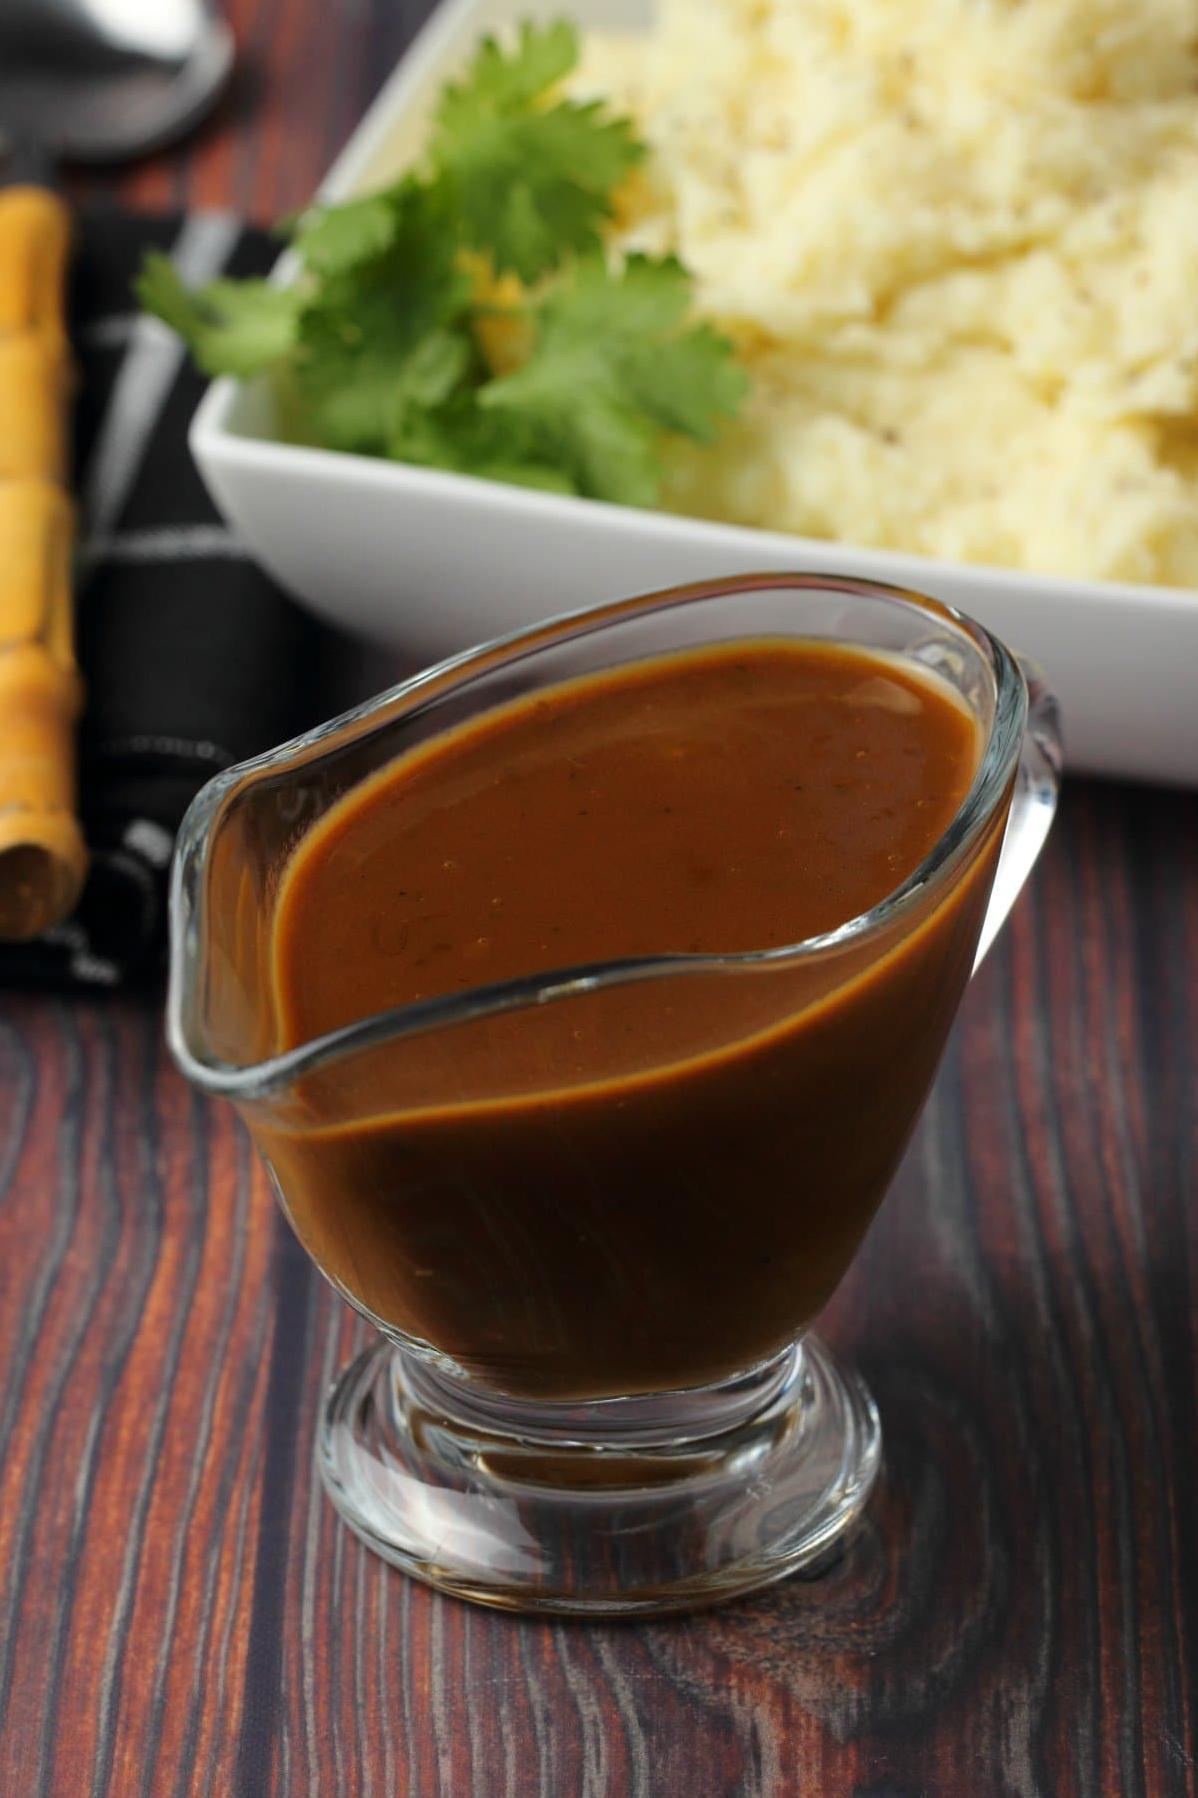  The smooth and creamy texture of this vegan gravy will leave you asking for more.